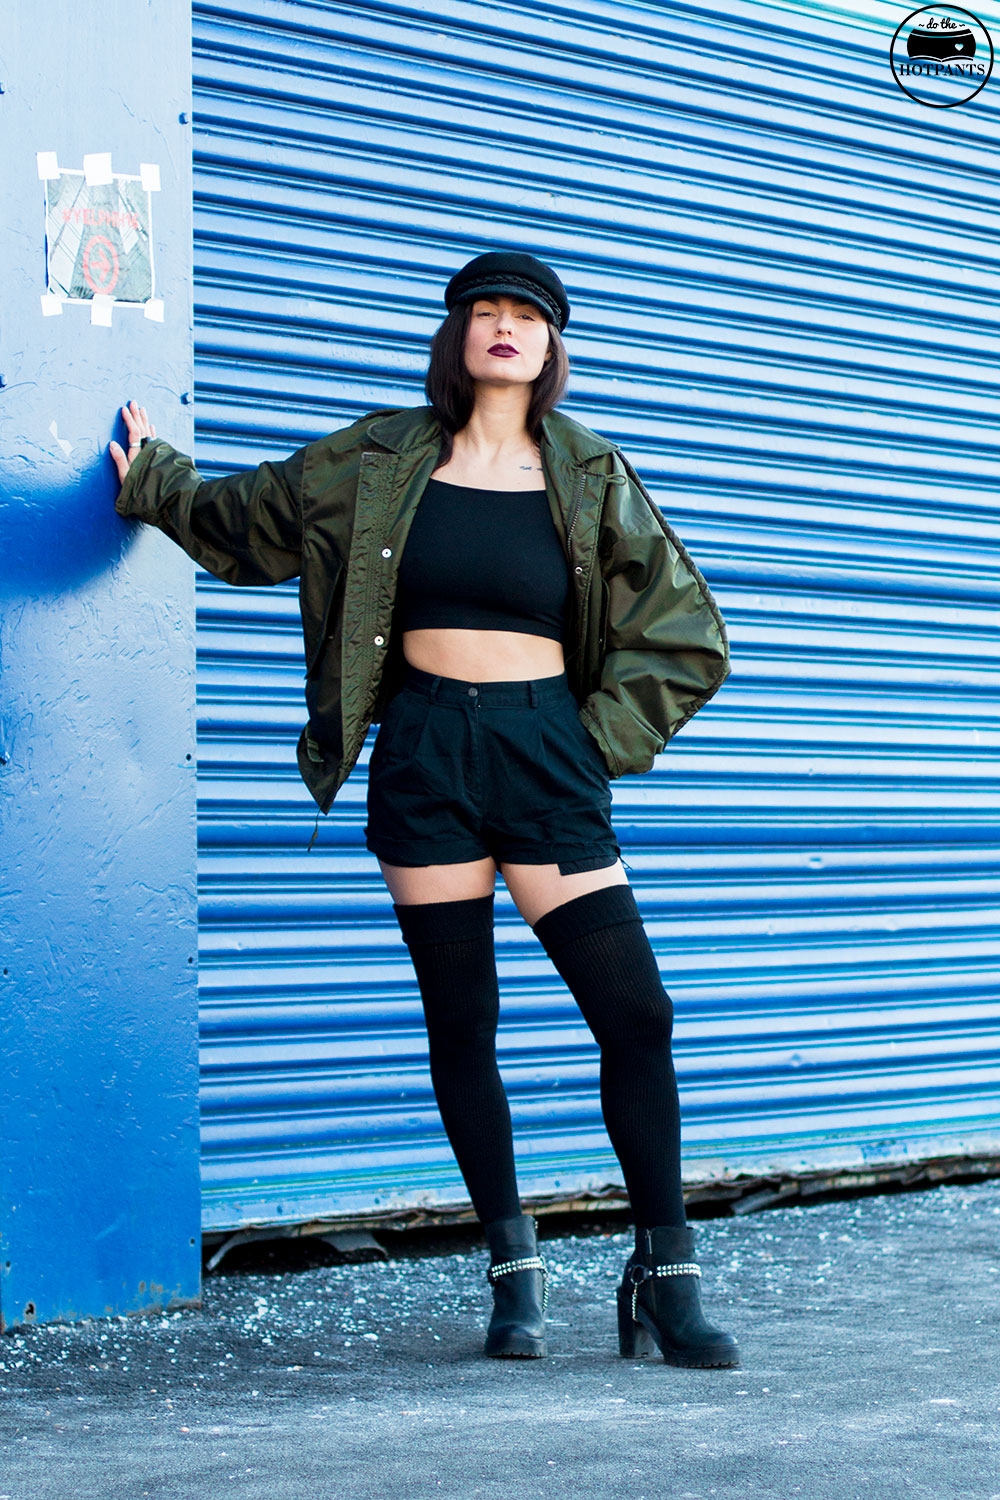 Do The Hotpants Dana Suchow Bomber Jacket Crop Top Thigh Highs Curvy Woman NYC Fashion IMG_7959